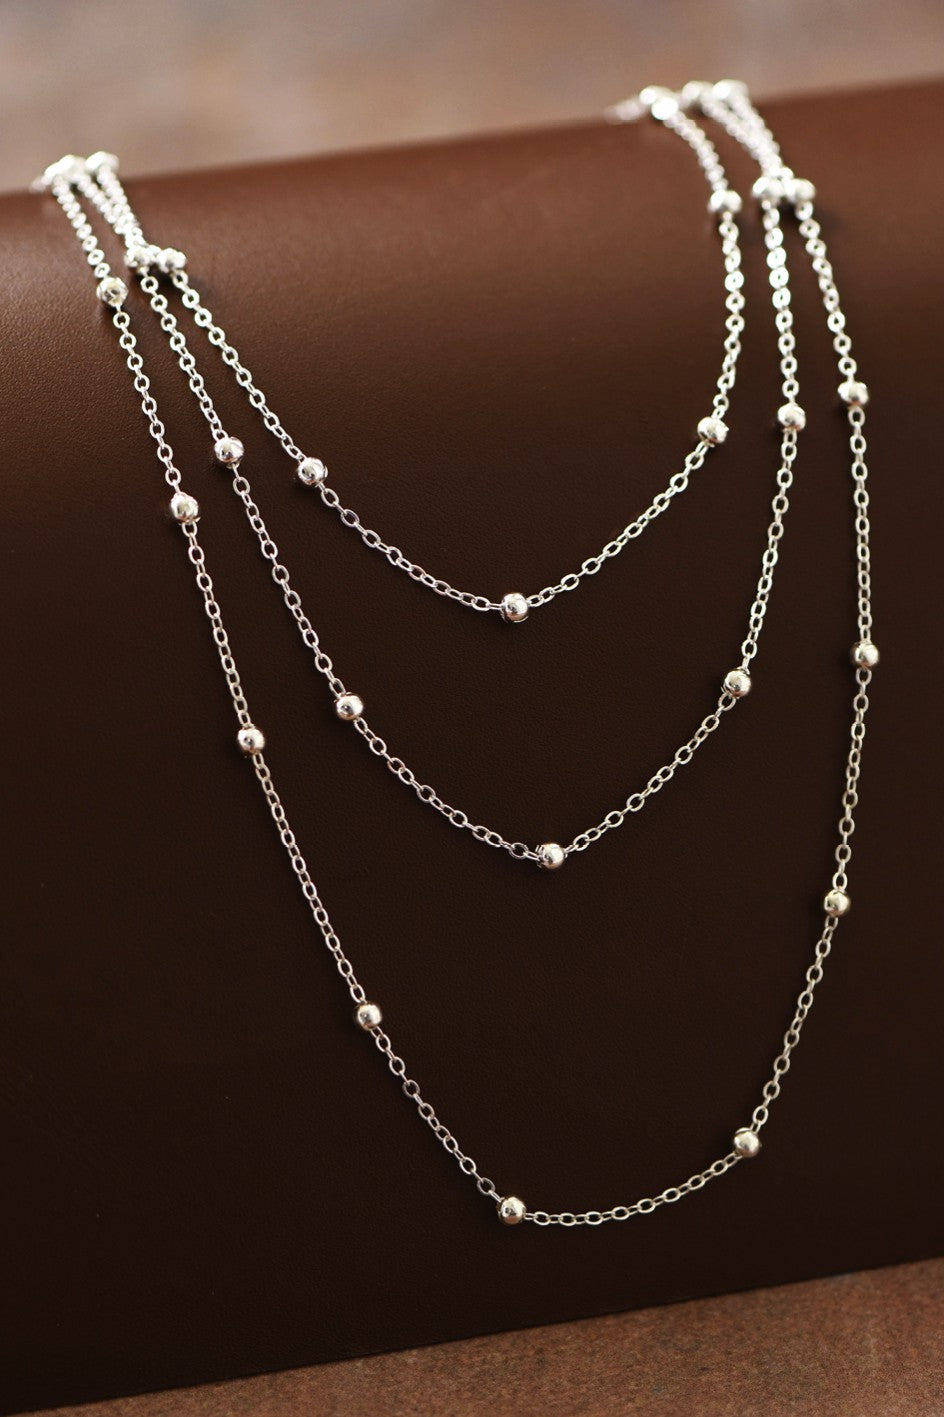 Delicate Triple Layered Necklace